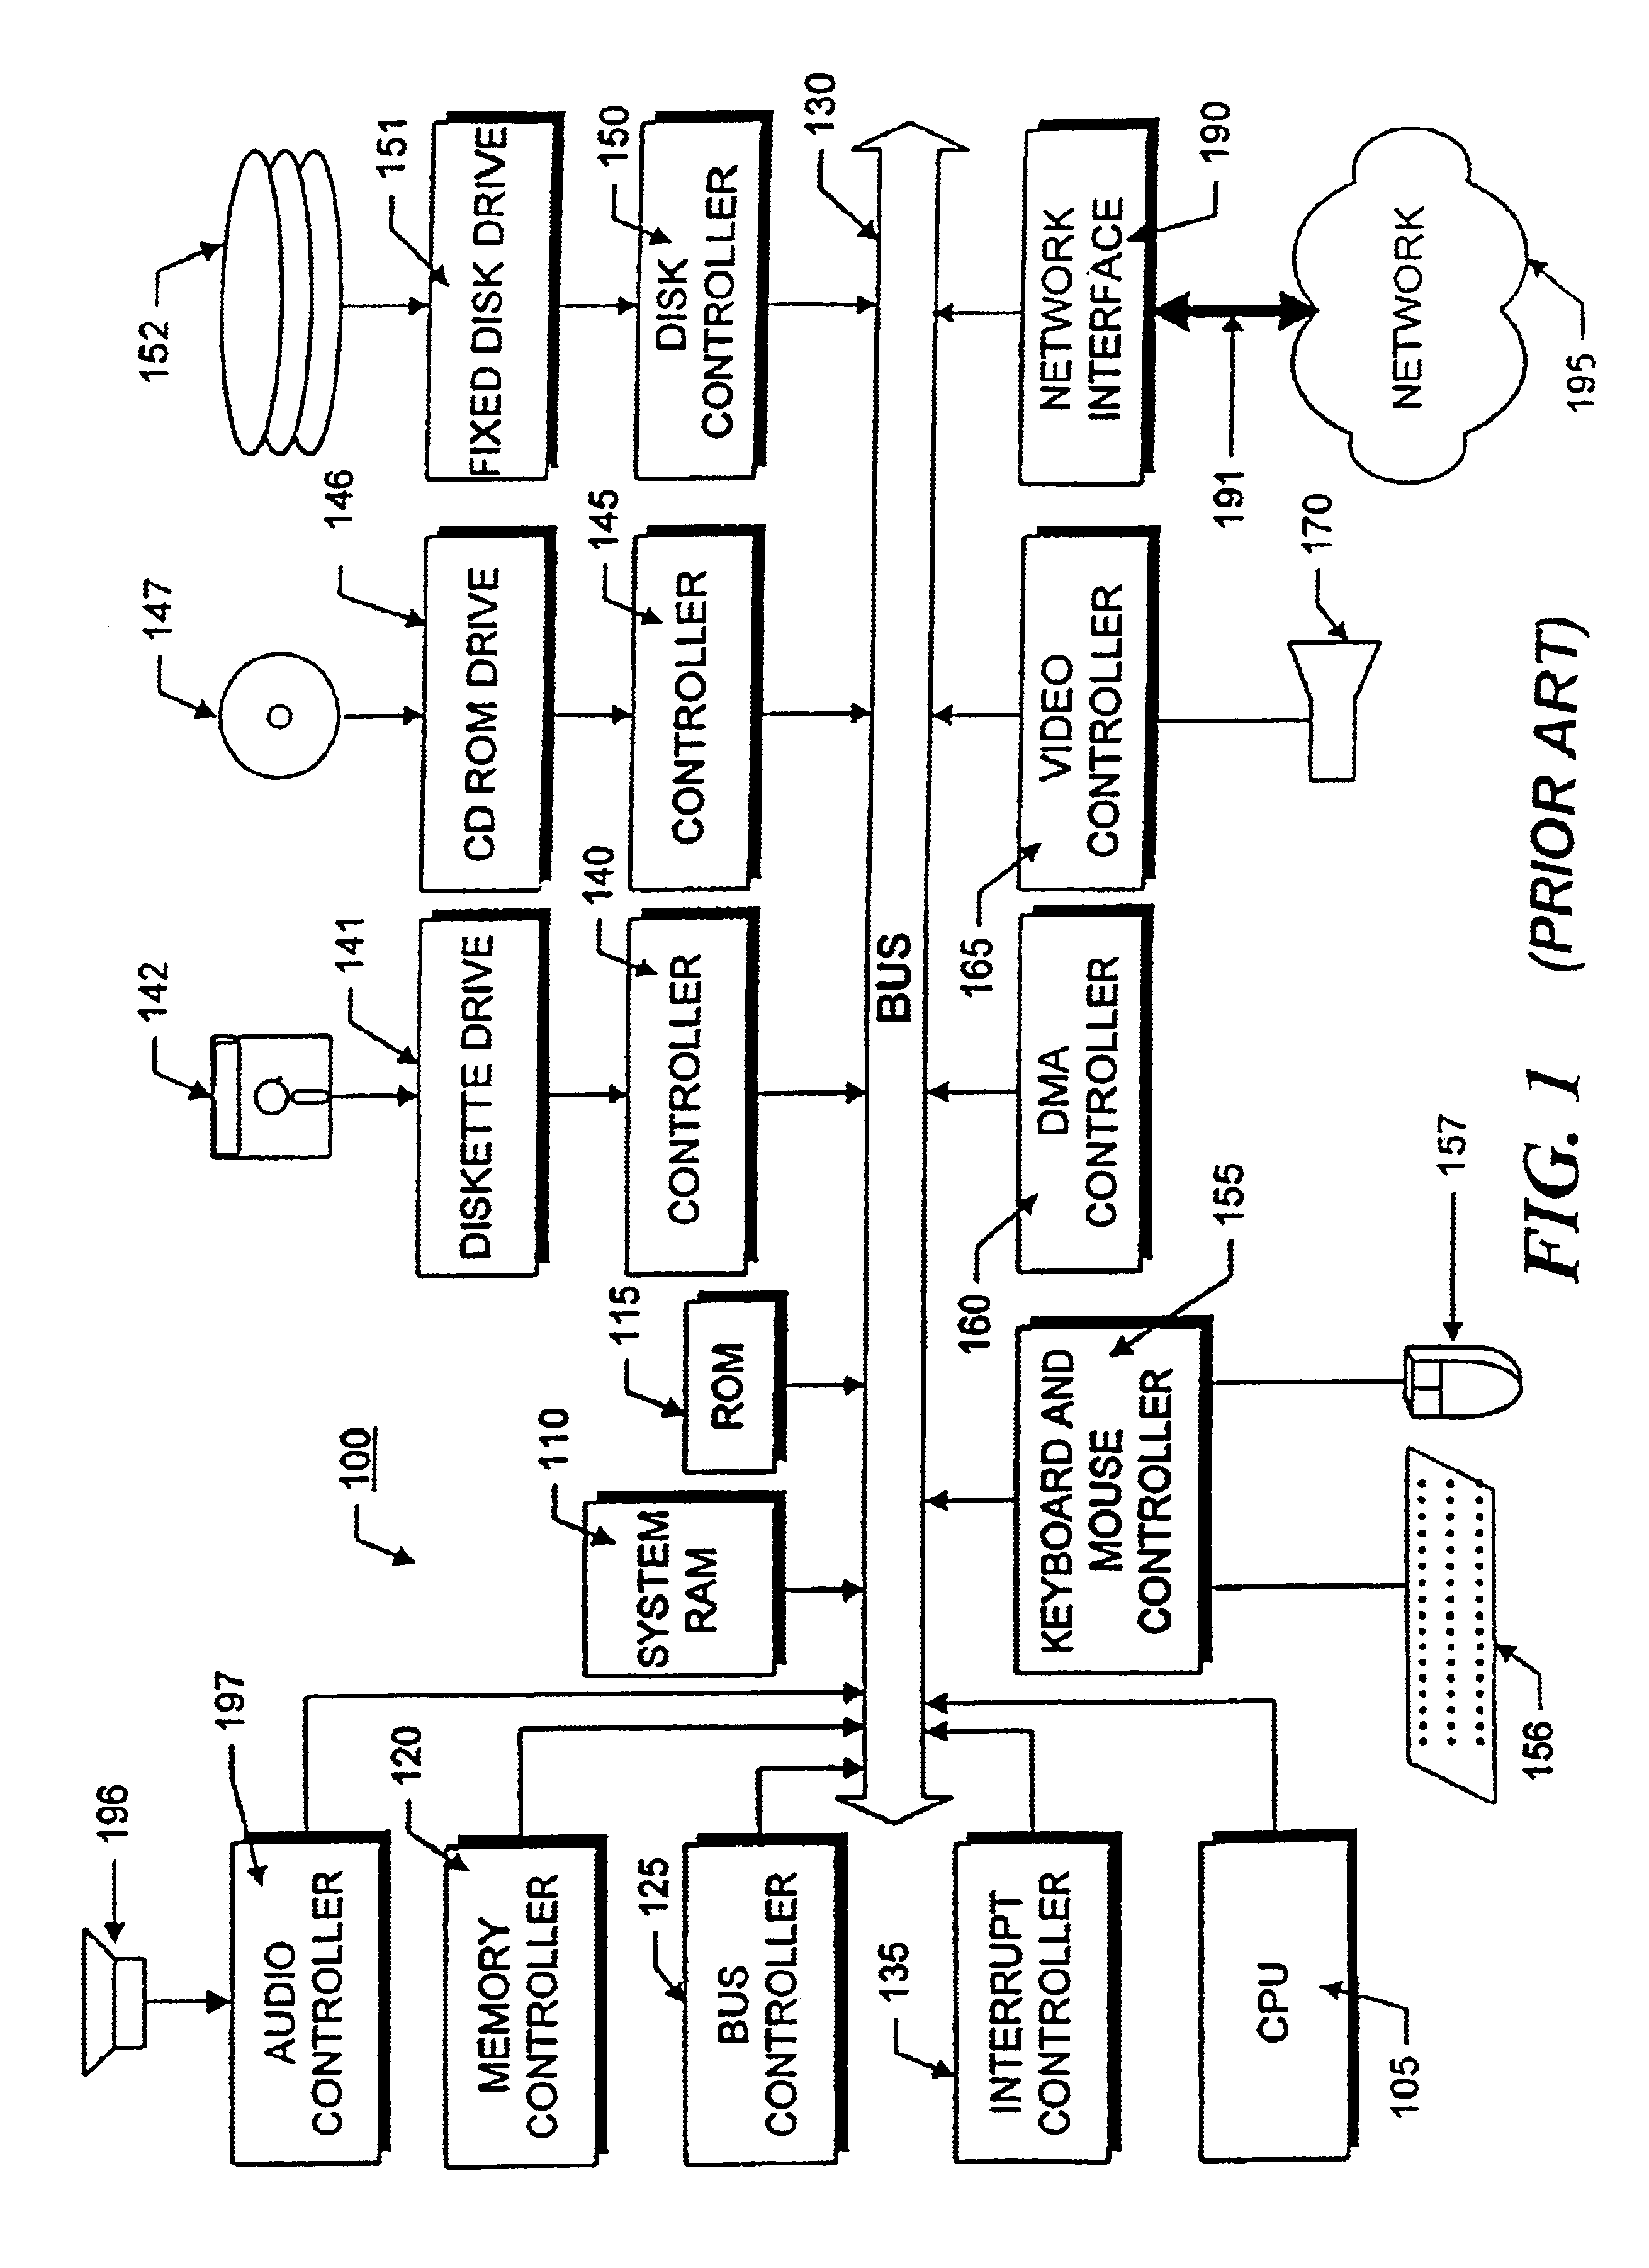 Method and system for ensuring consistency of design rule application in a CAD environment